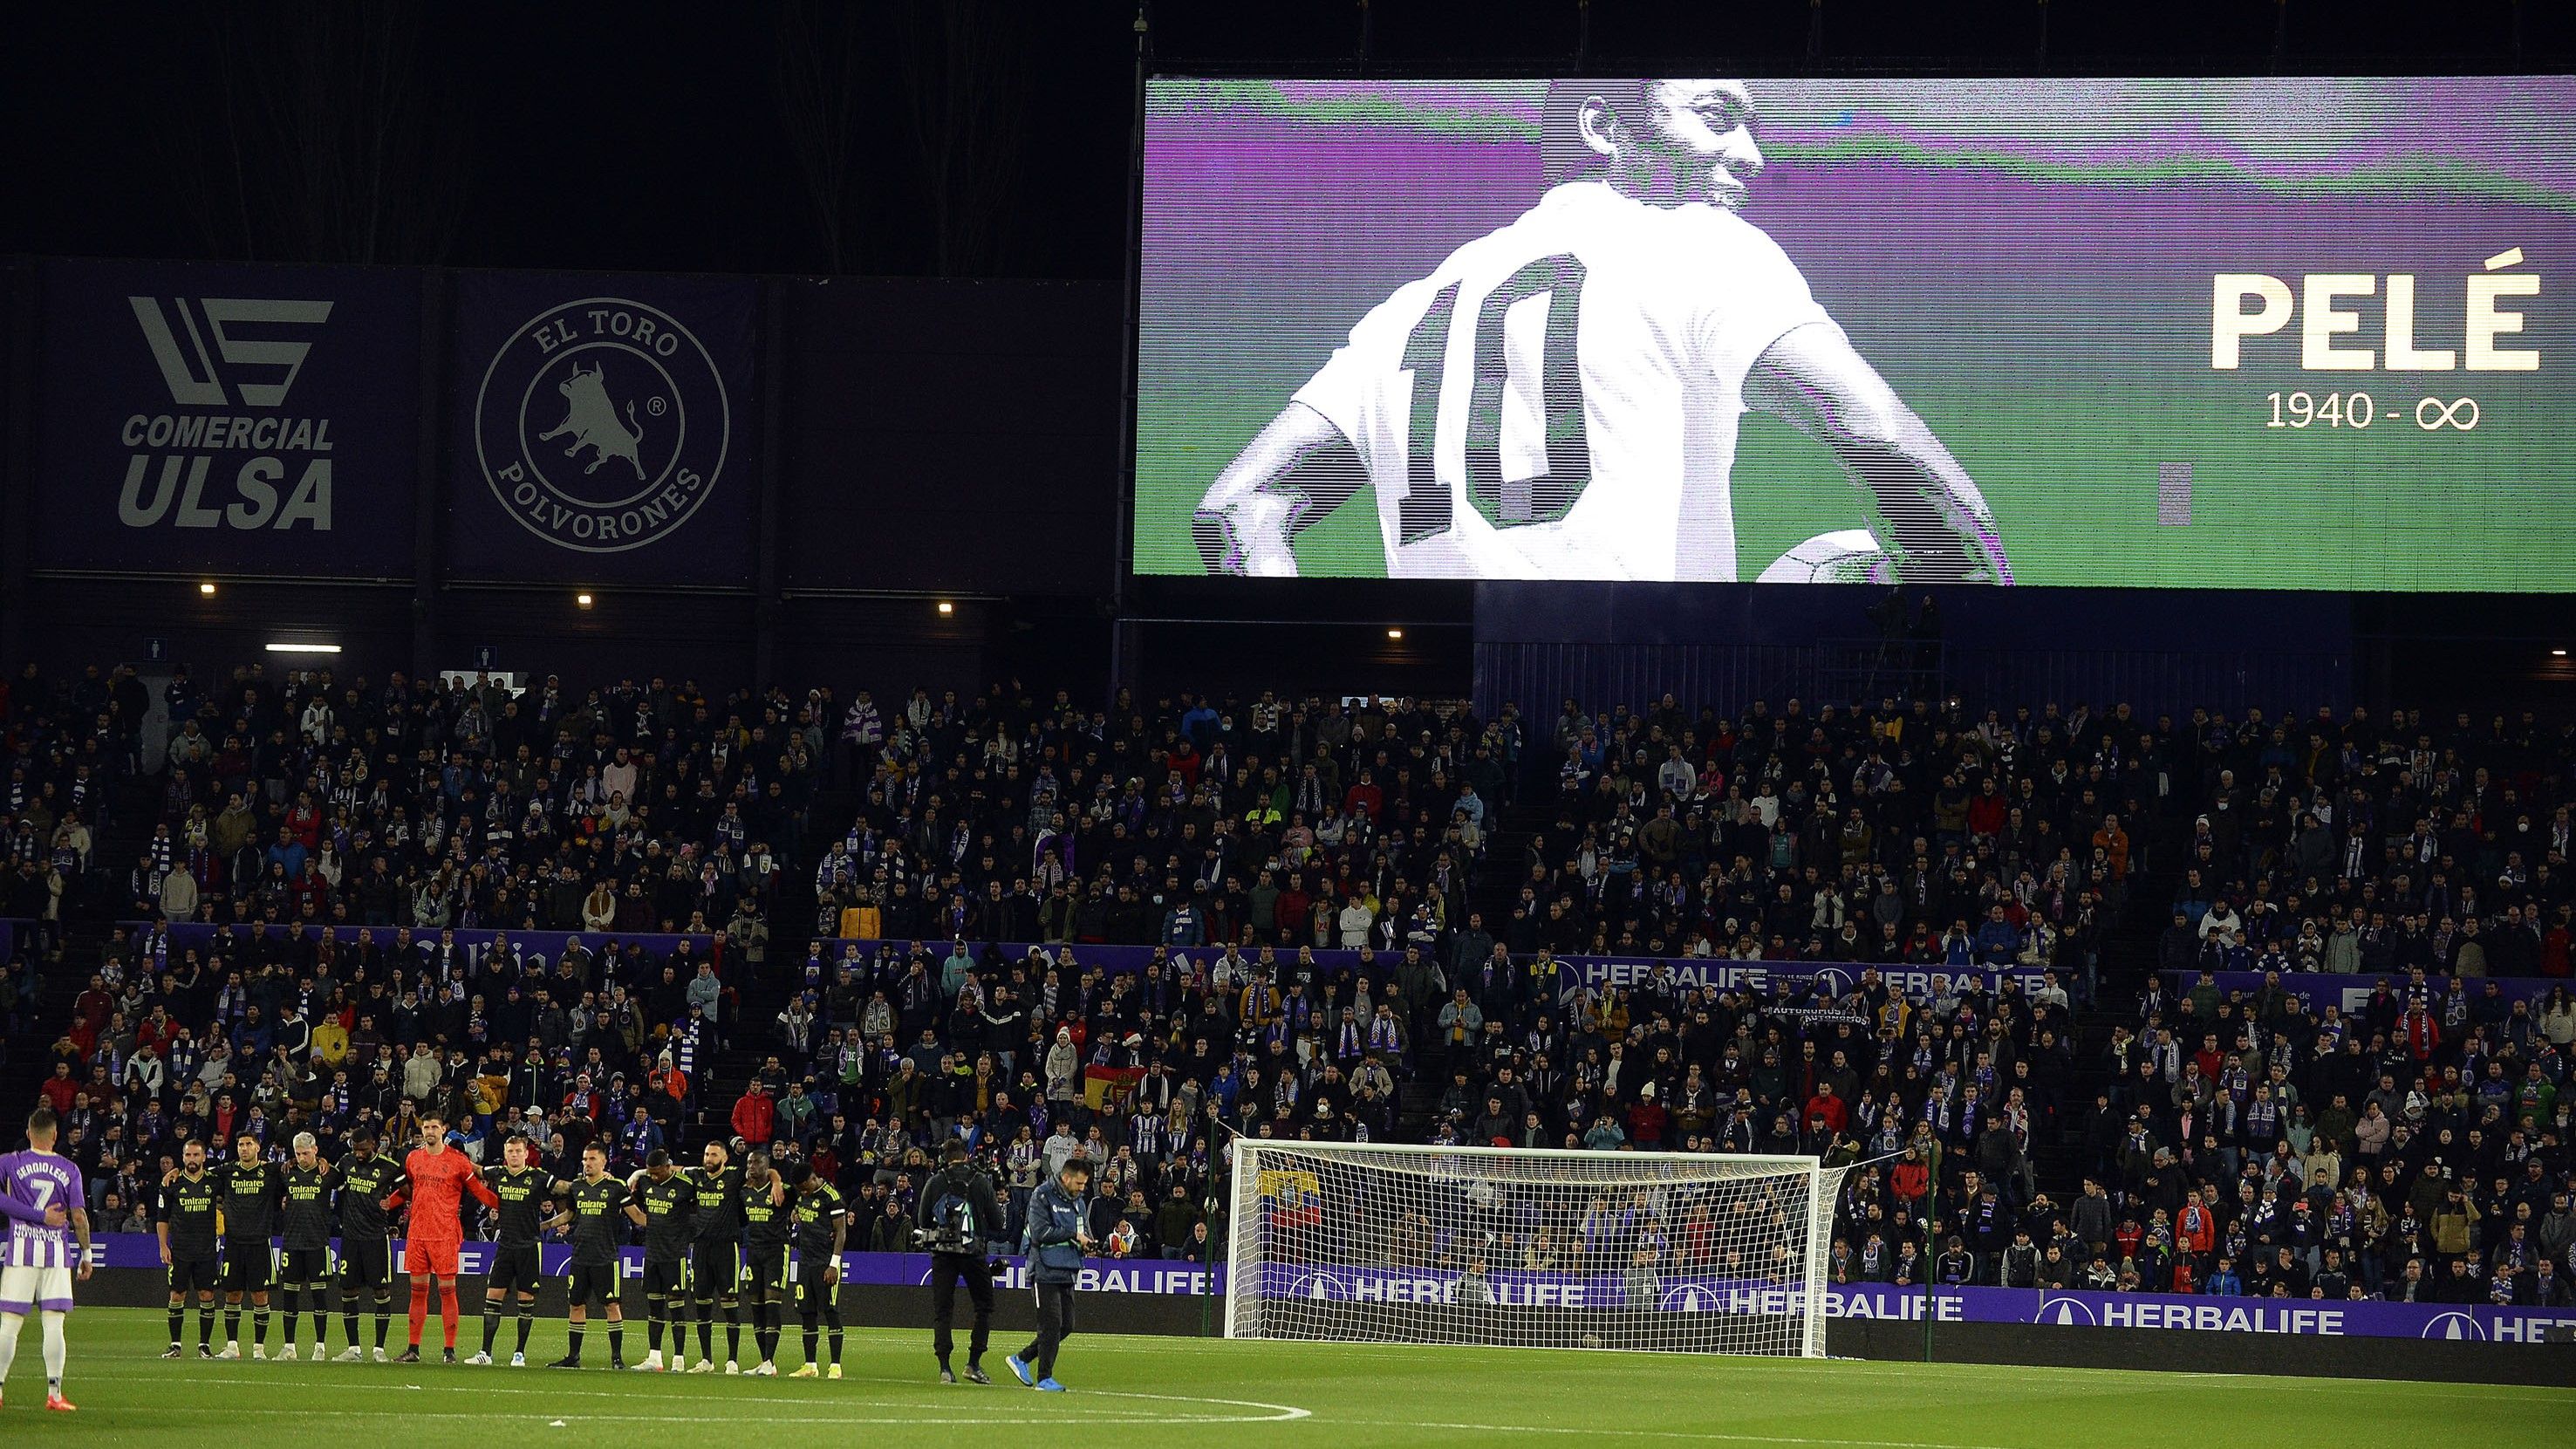 Minute_Silence_For_Pele_Real_Valladolid_vs_Real_Madrid_2caf581f35.JPG